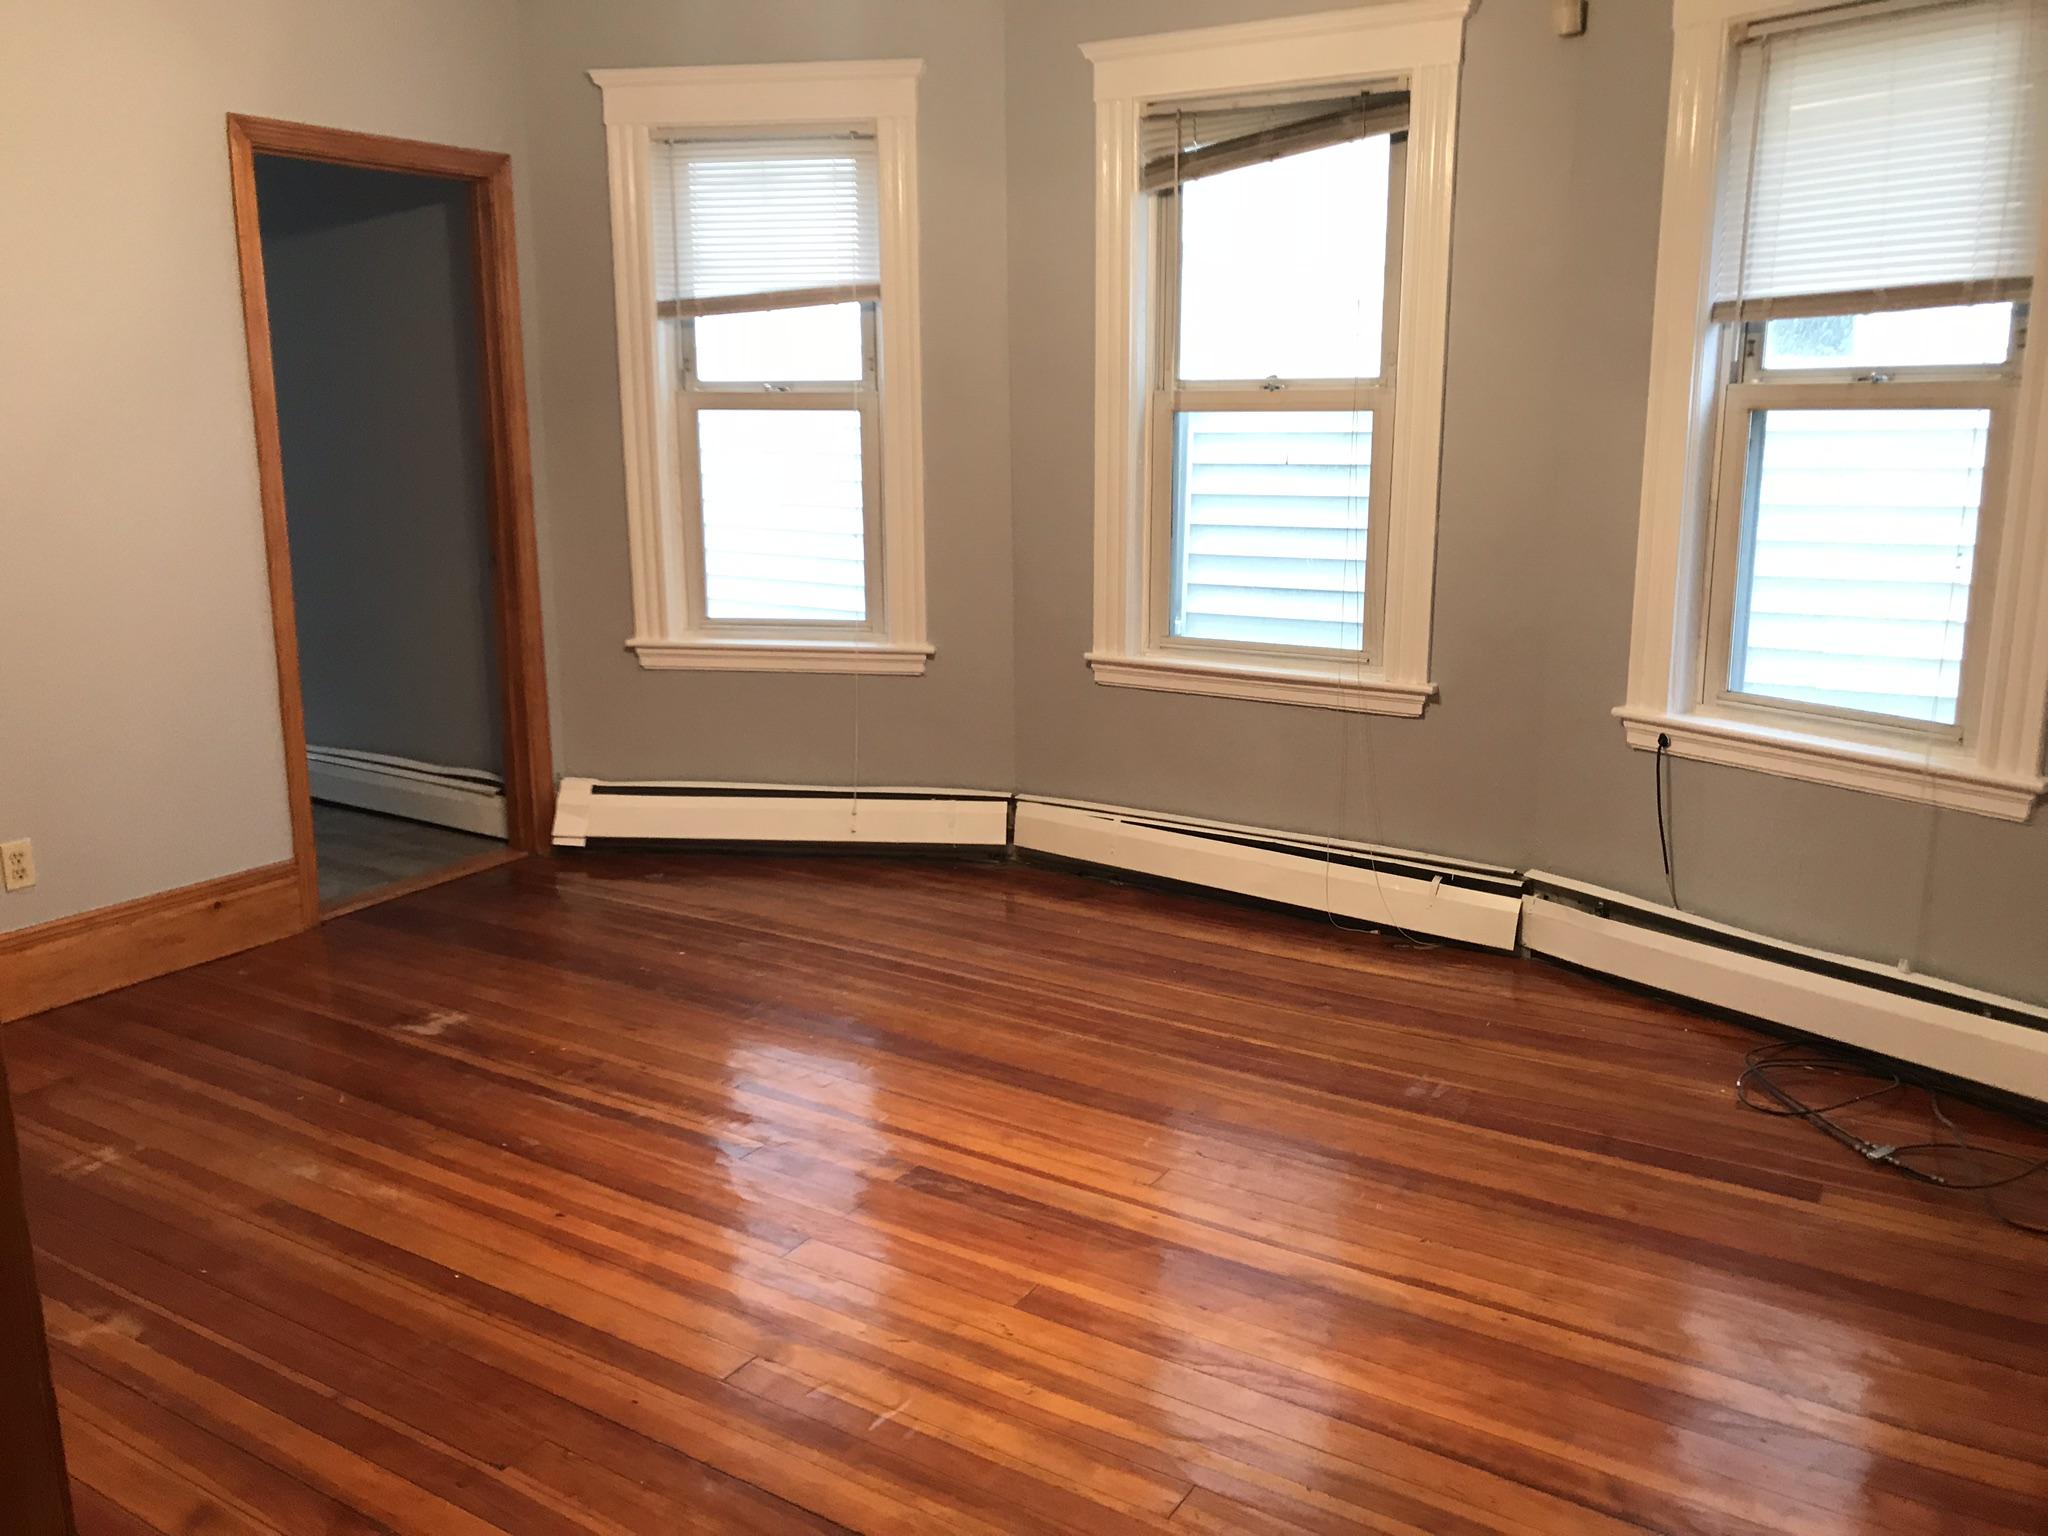 Photos of apartment on Rosedale St.,Boston MA 02124